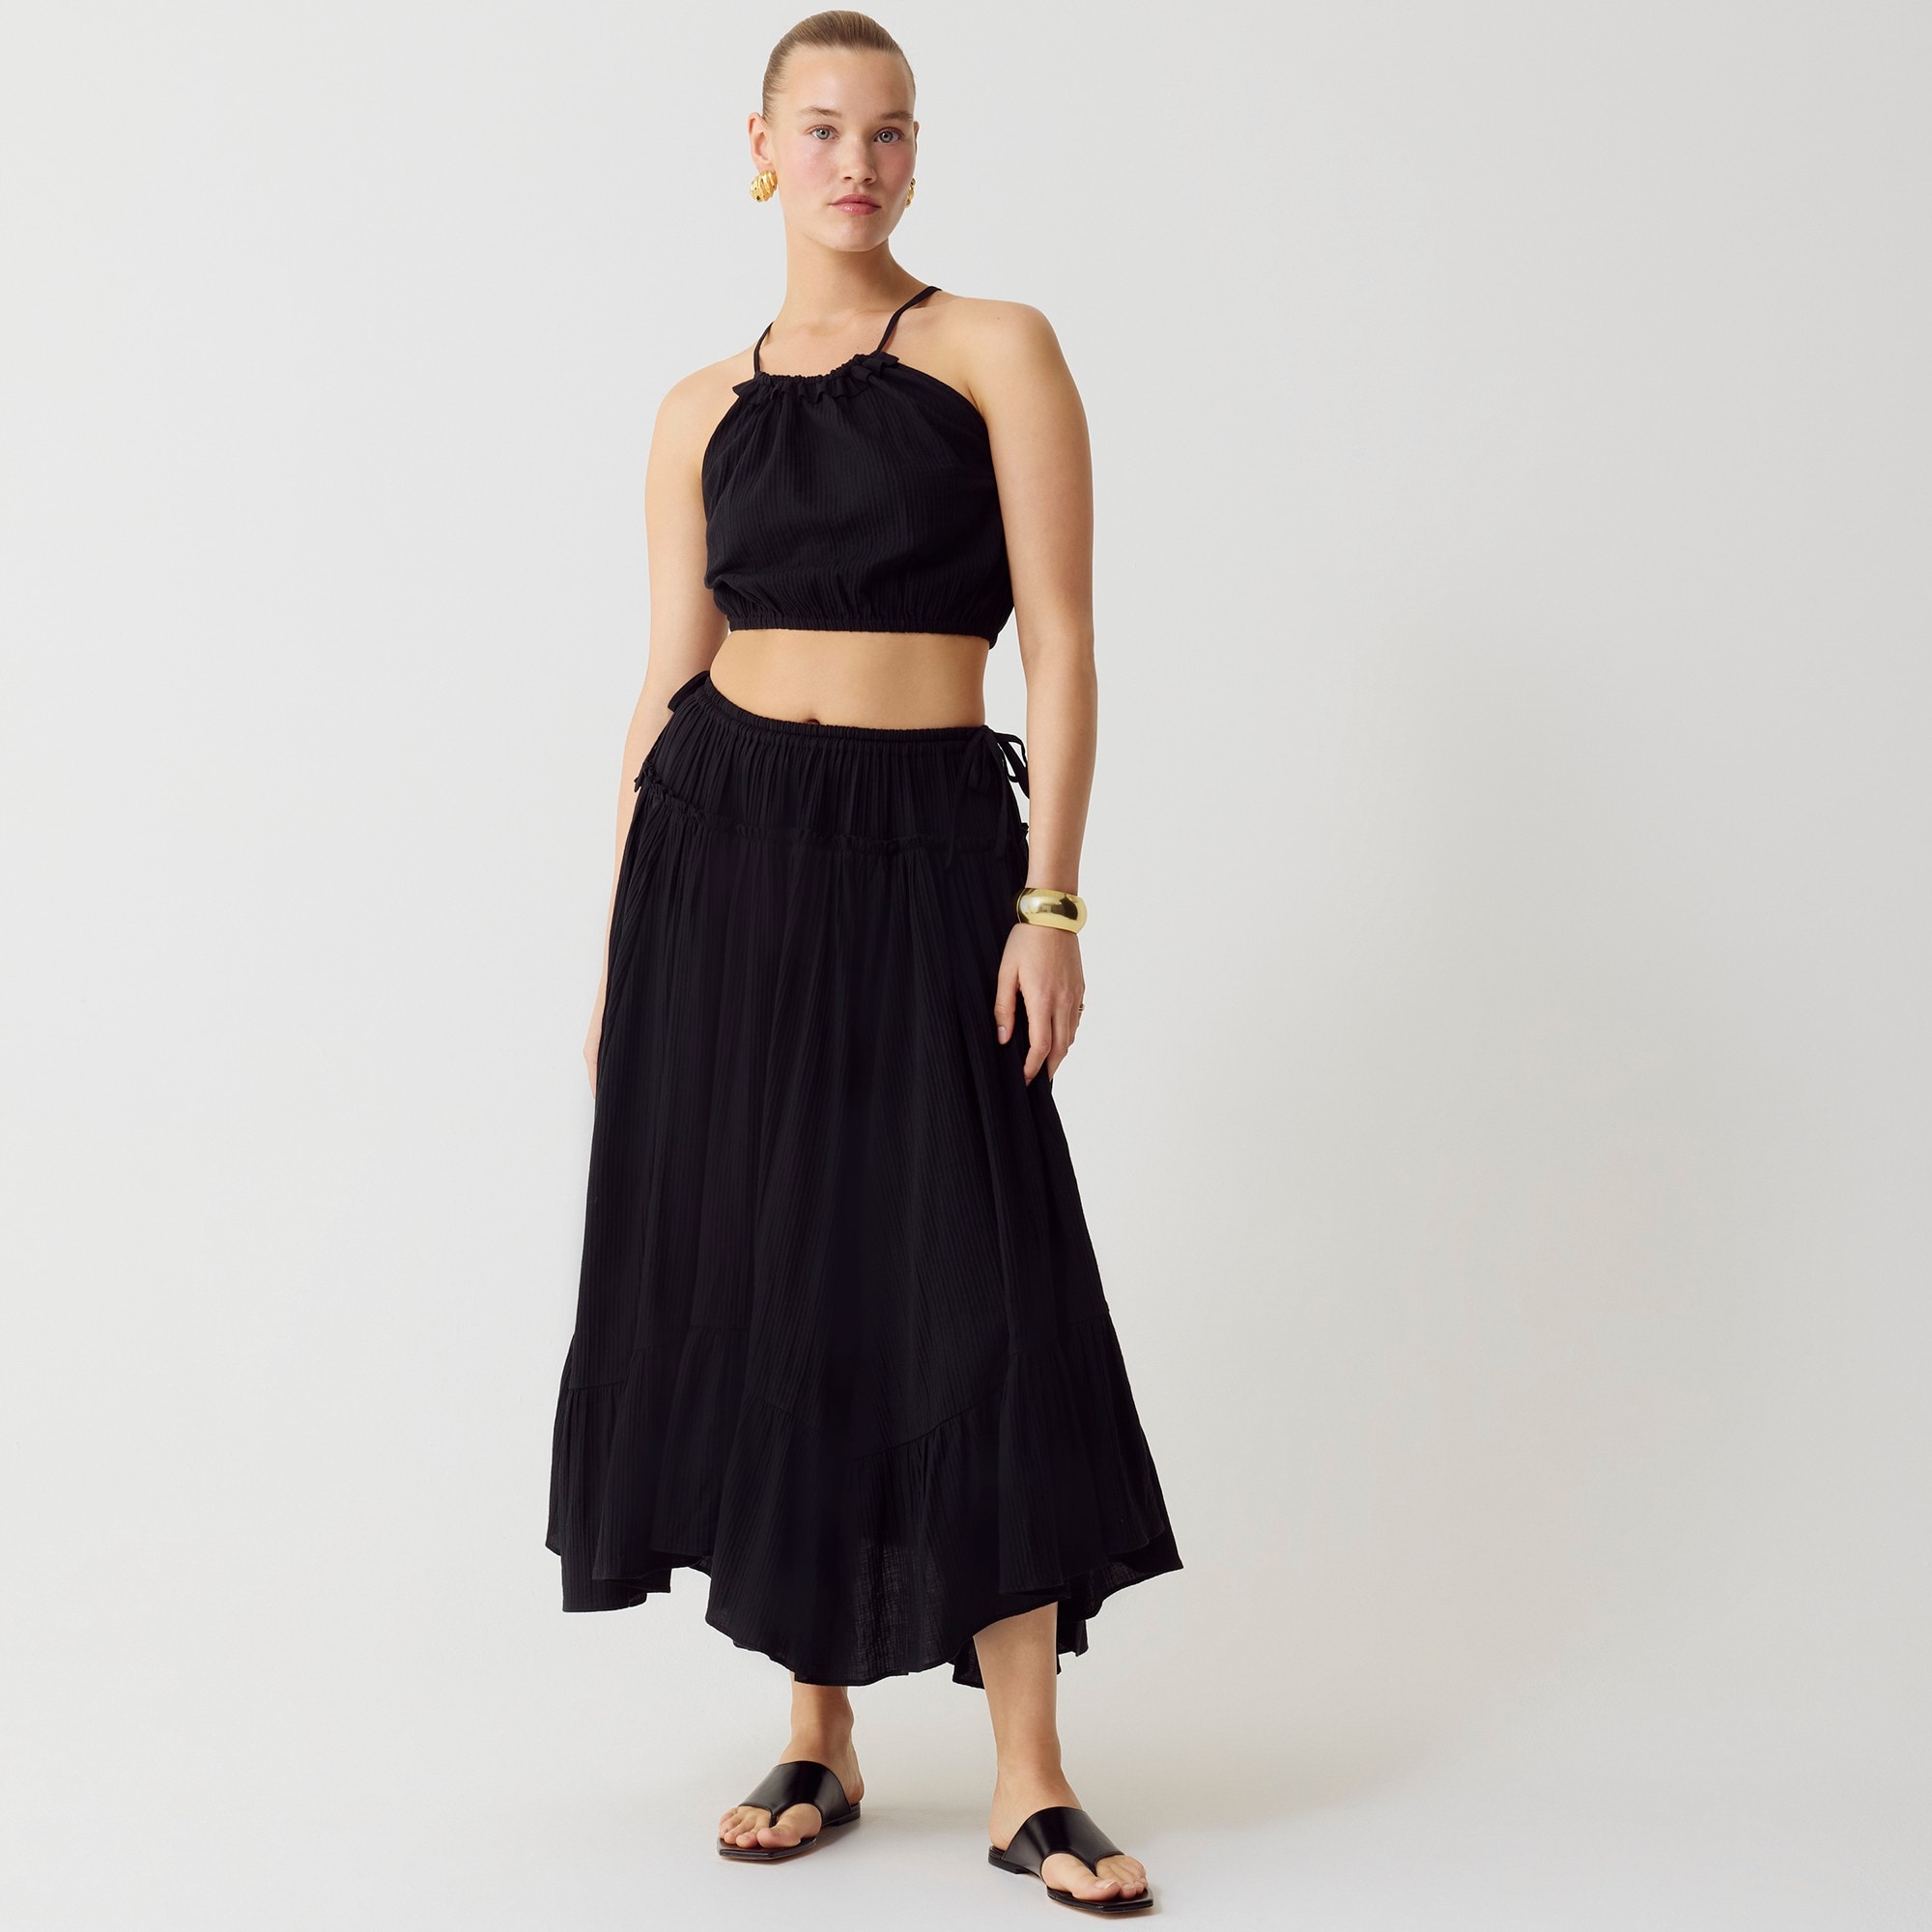  Halter top and skirt set in airy gauze